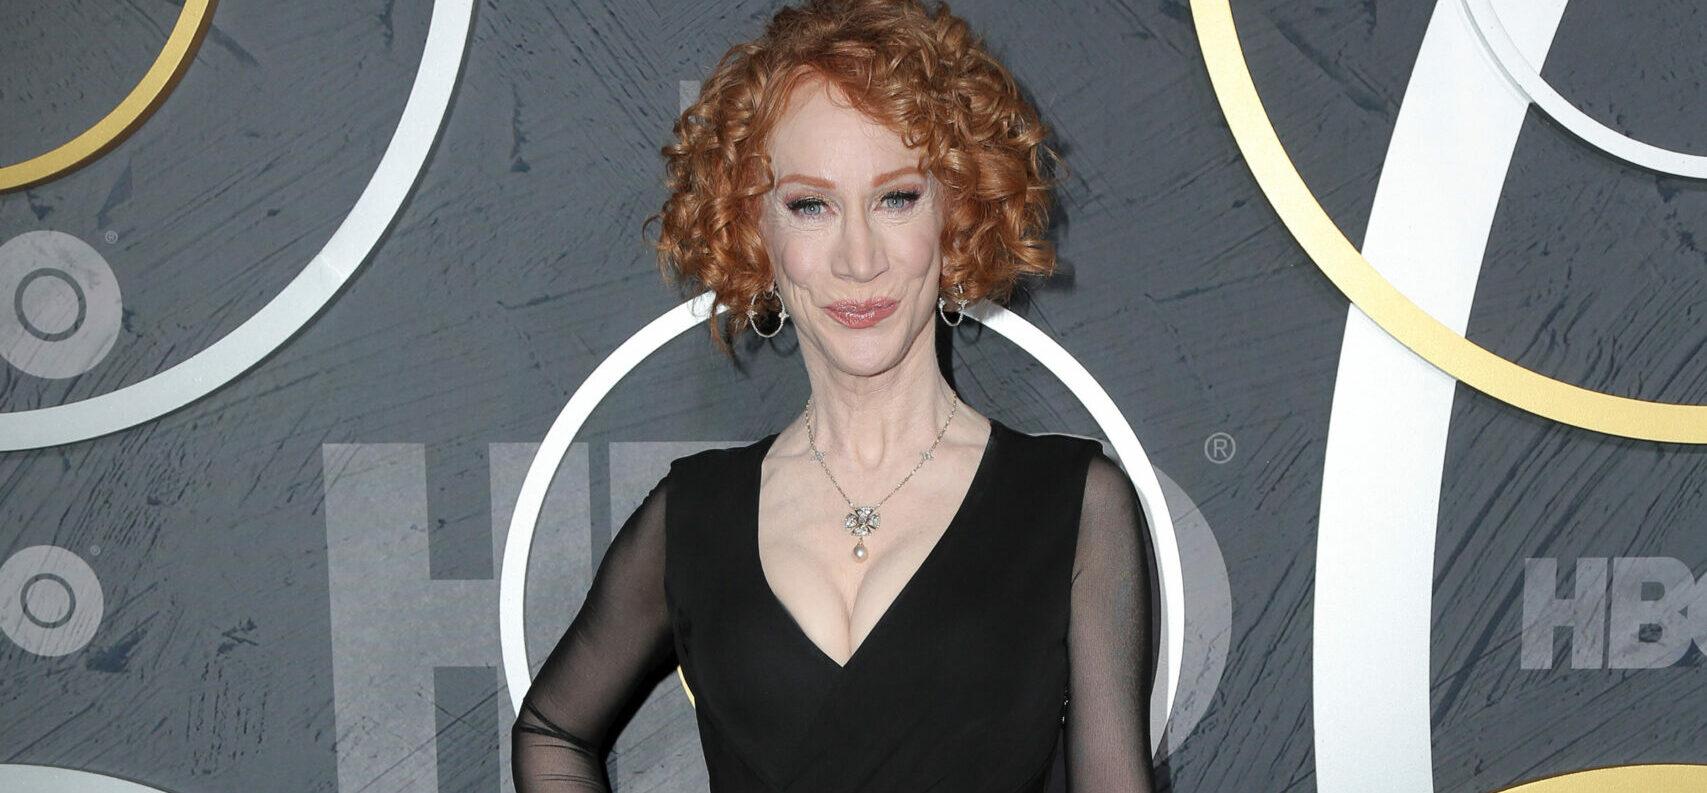 Kathy Griffin Has Tattoed Her Lips, Loved Ones Are Shocked By The ‘Swollen’ Appearance